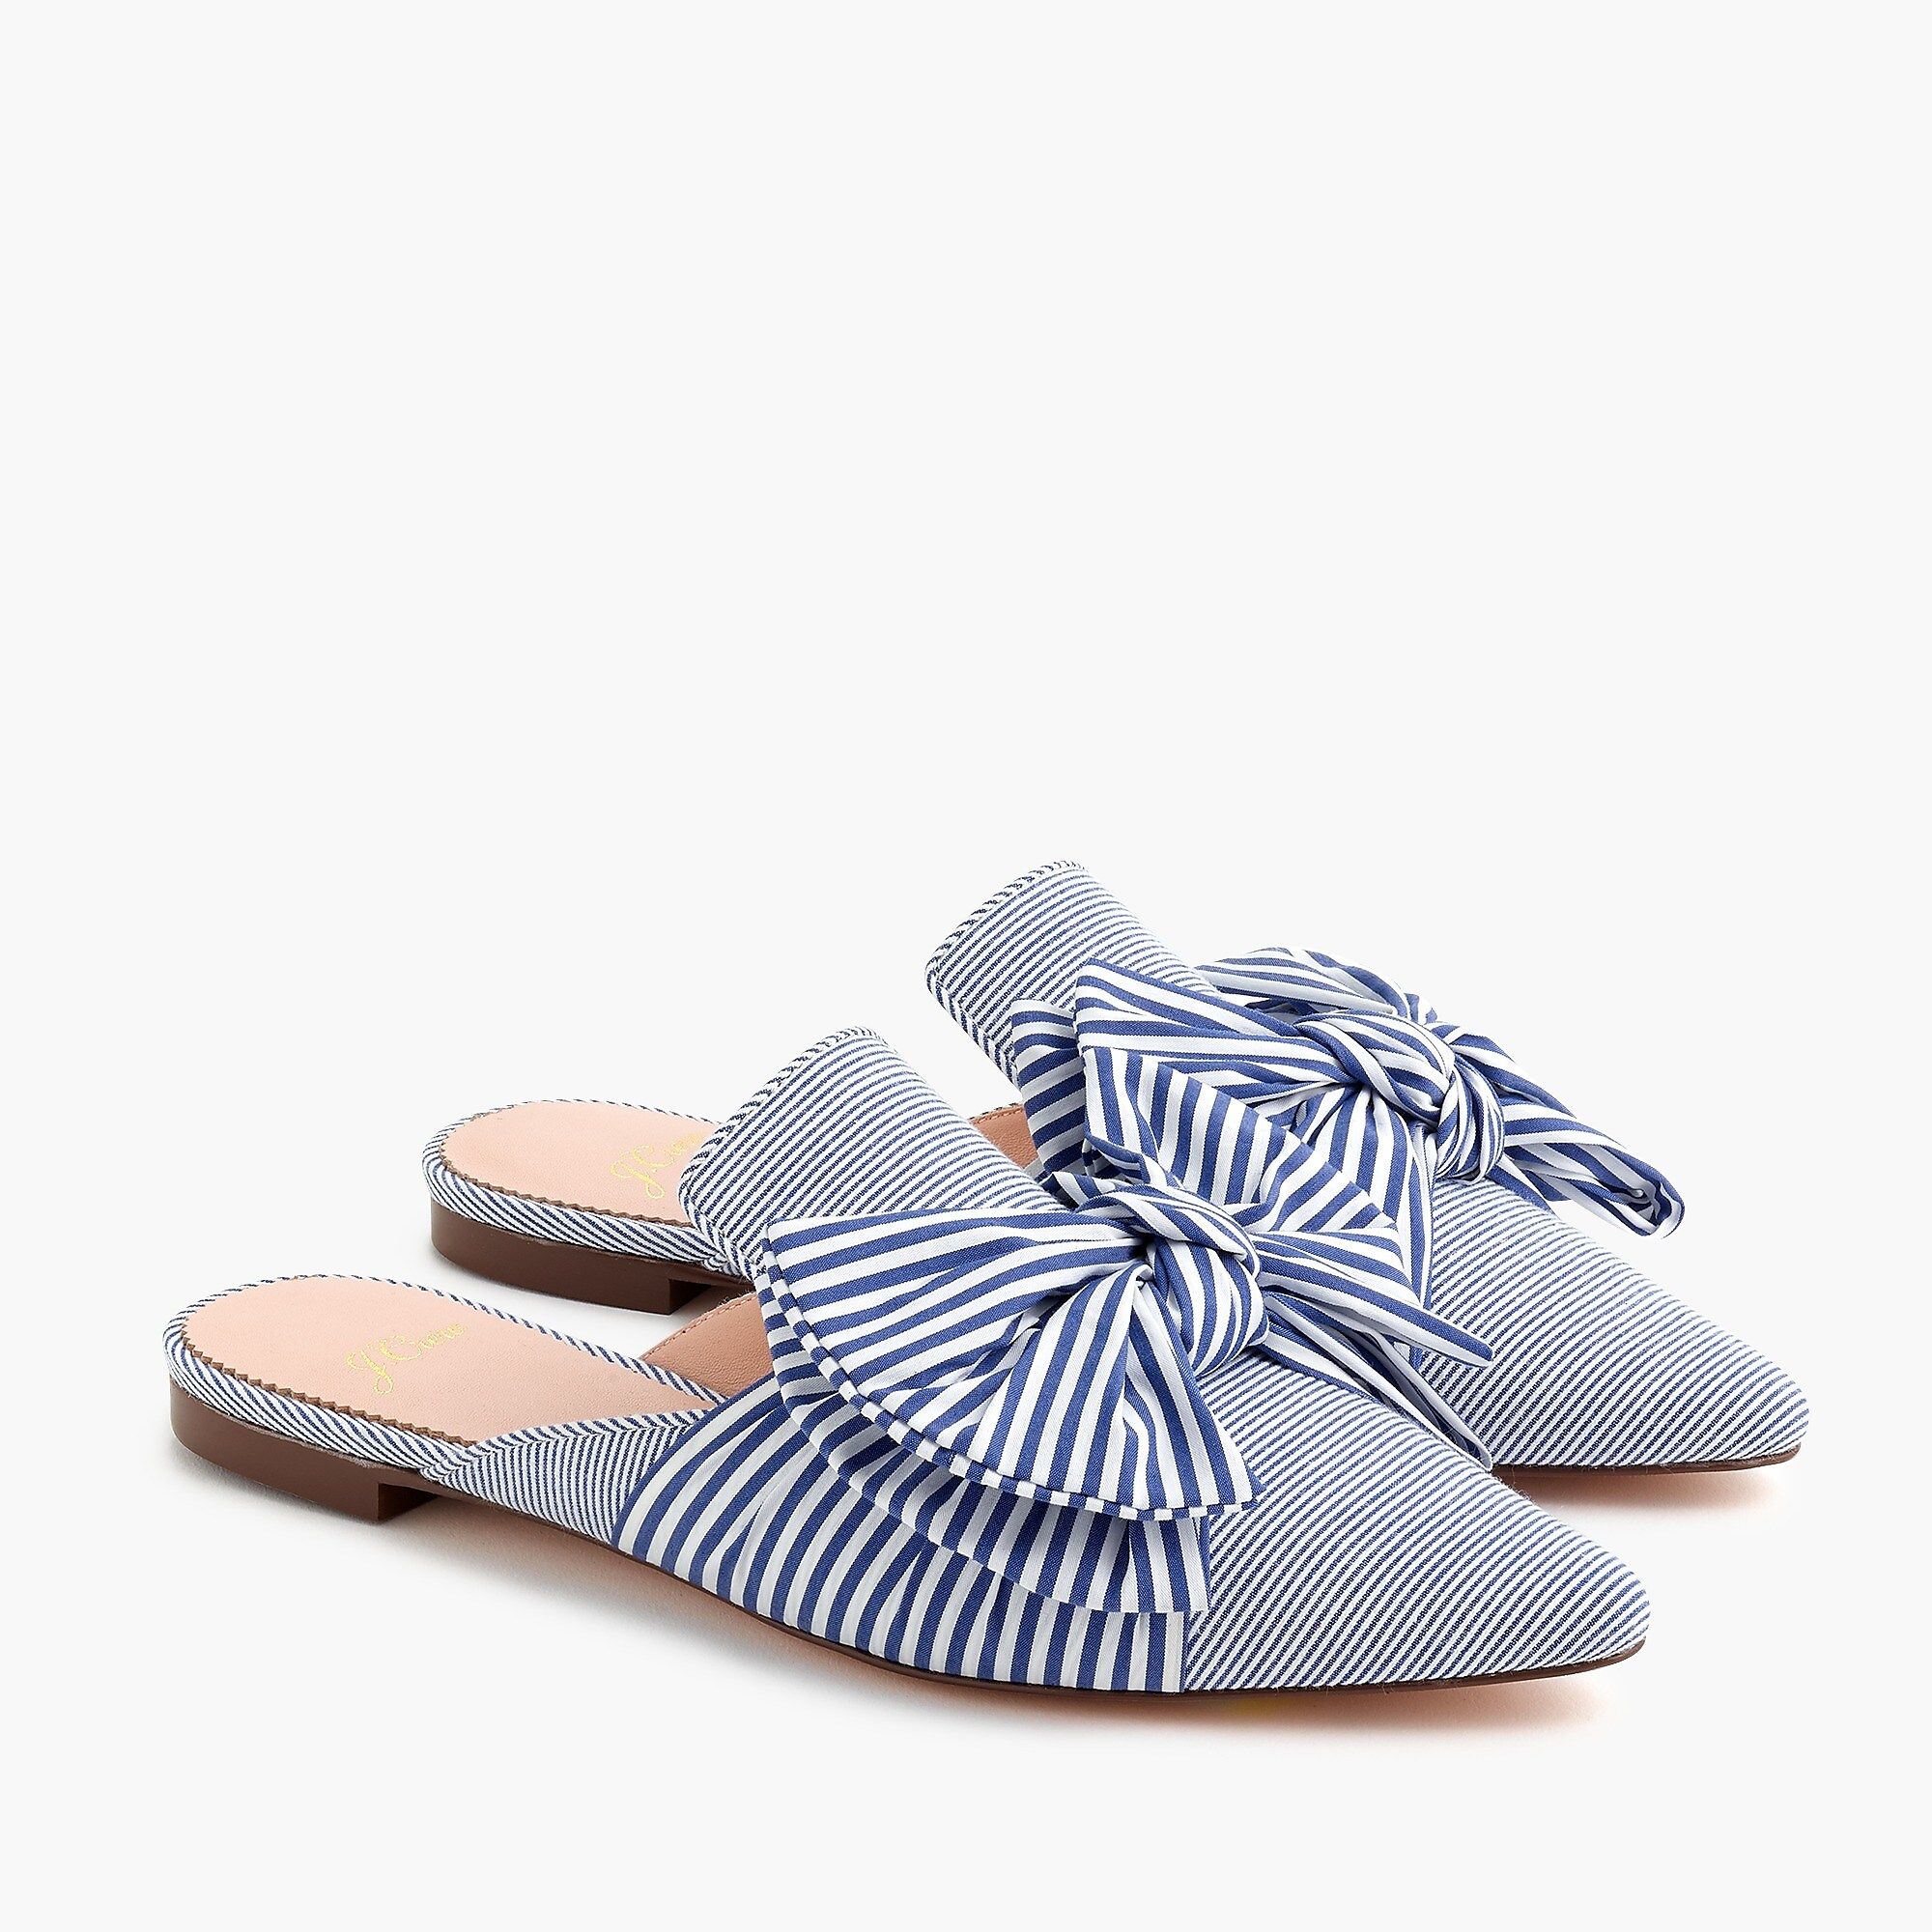 Pointed-toe bow slides in mixed stripe | J.Crew US